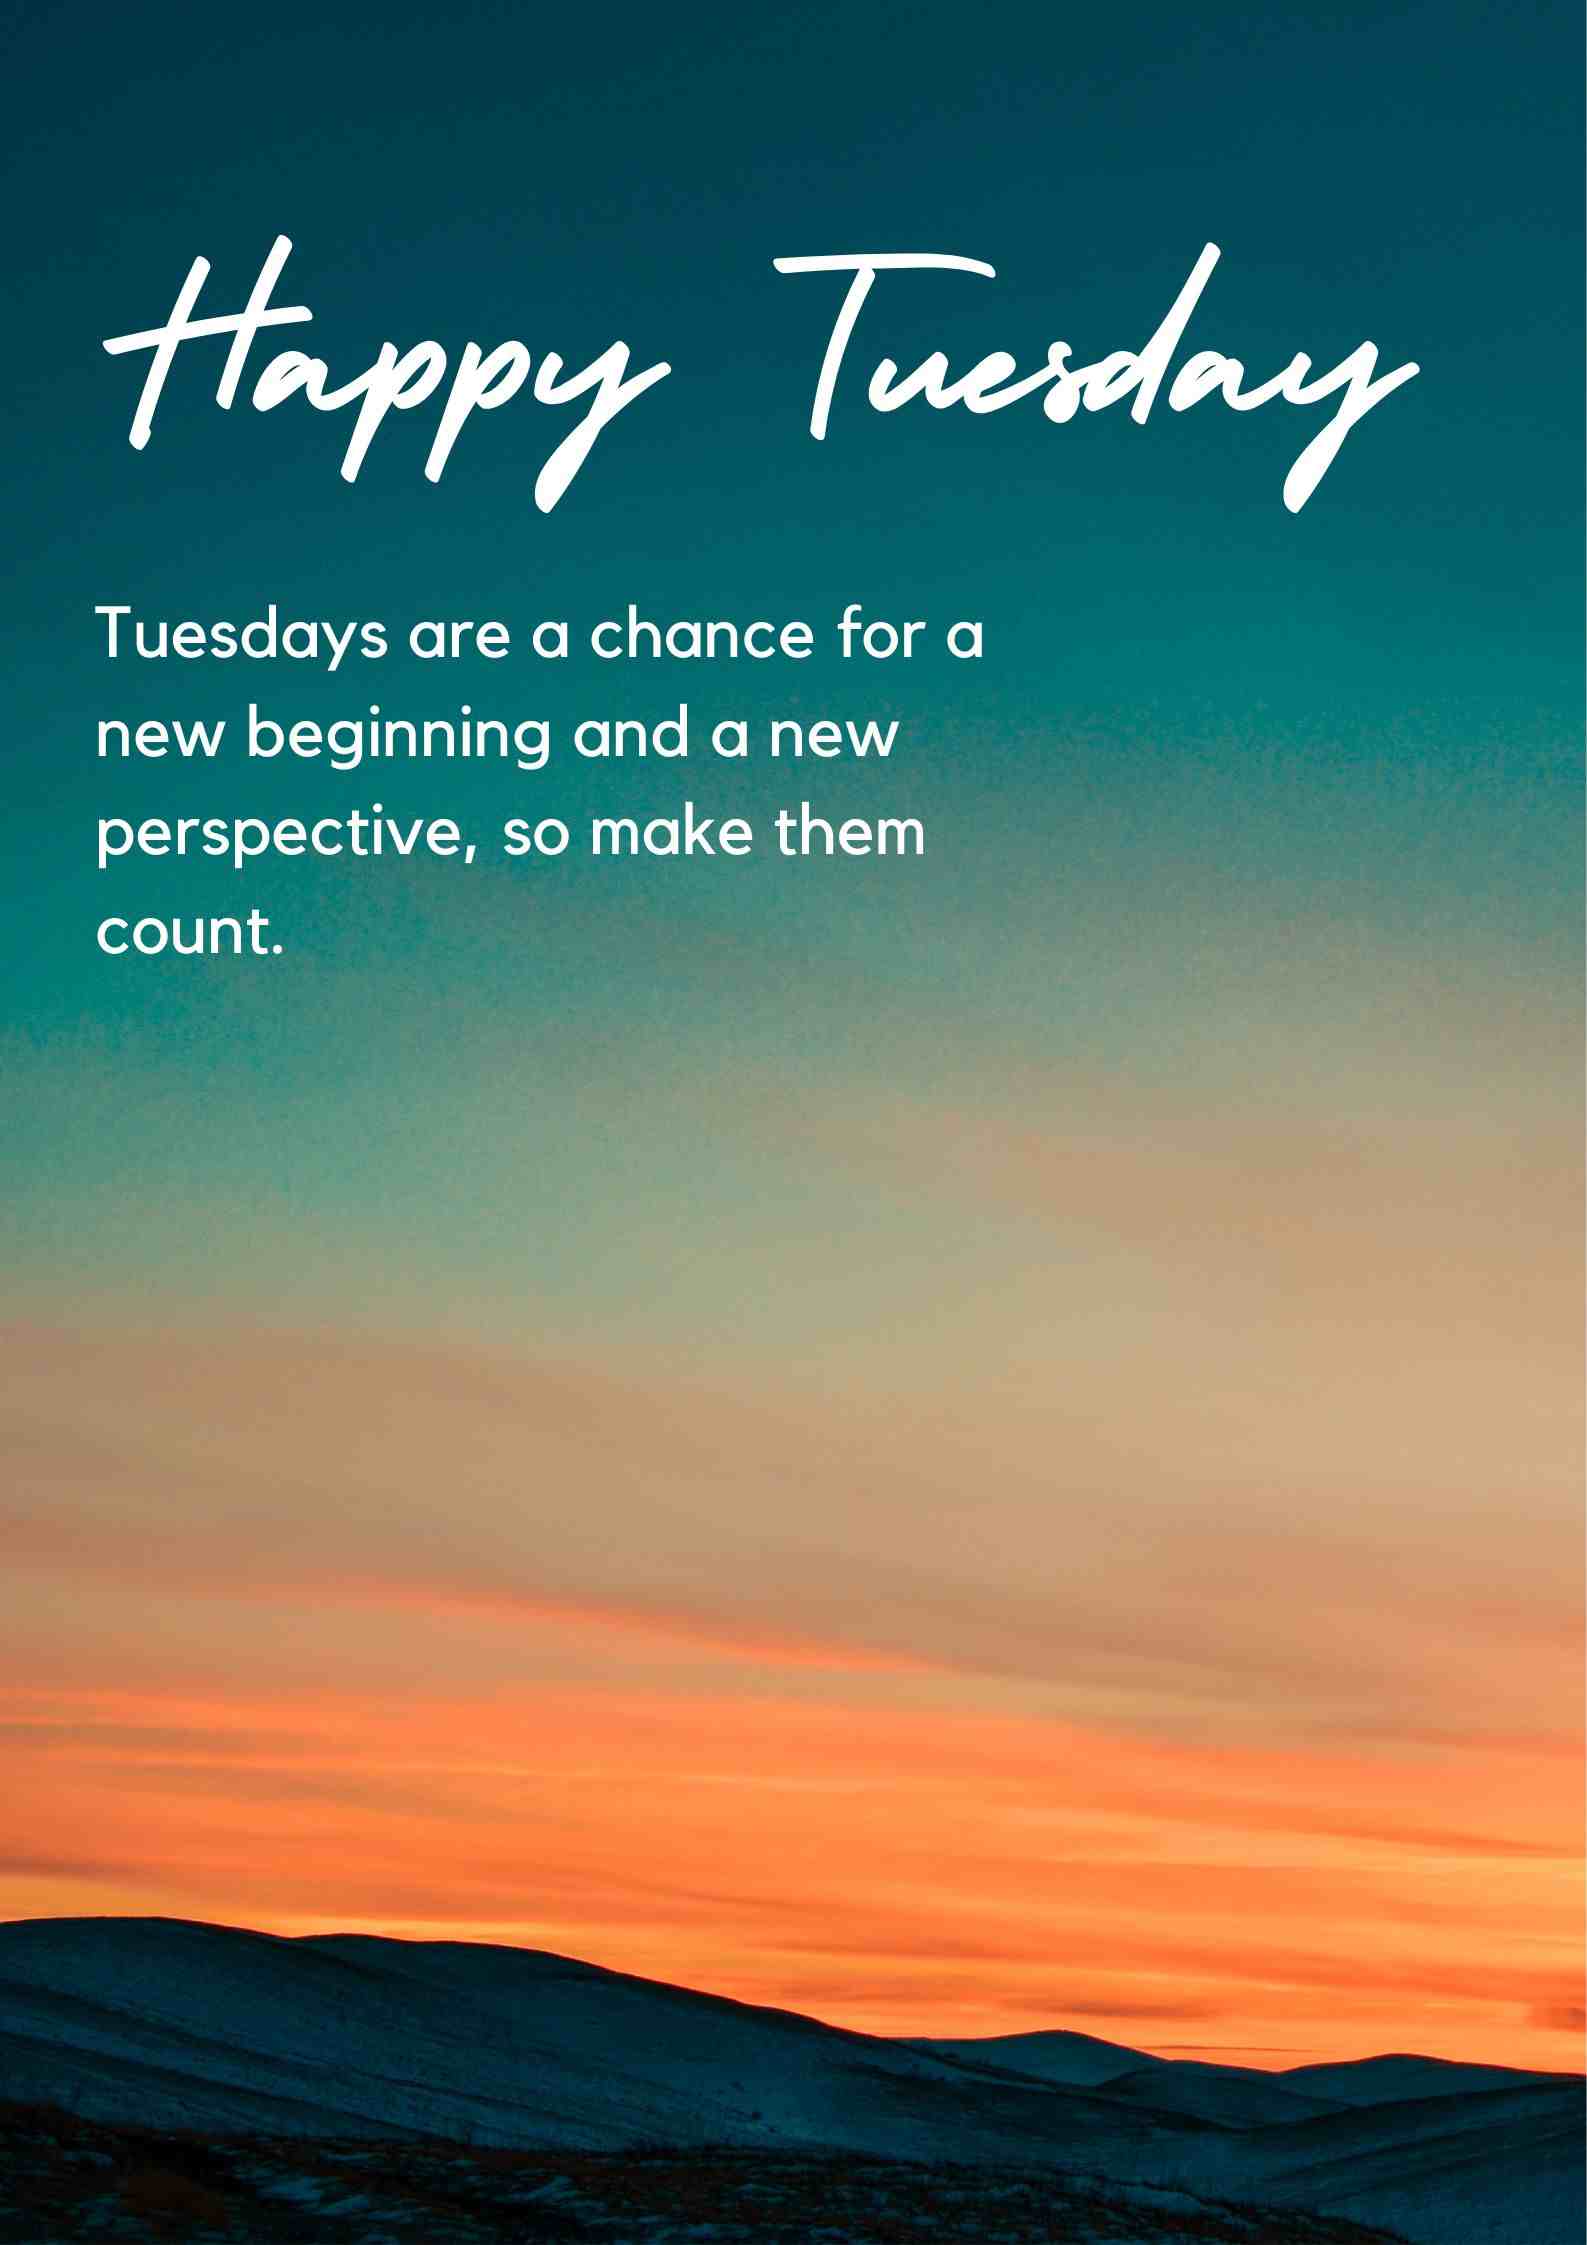 happy tuesday images and quotes